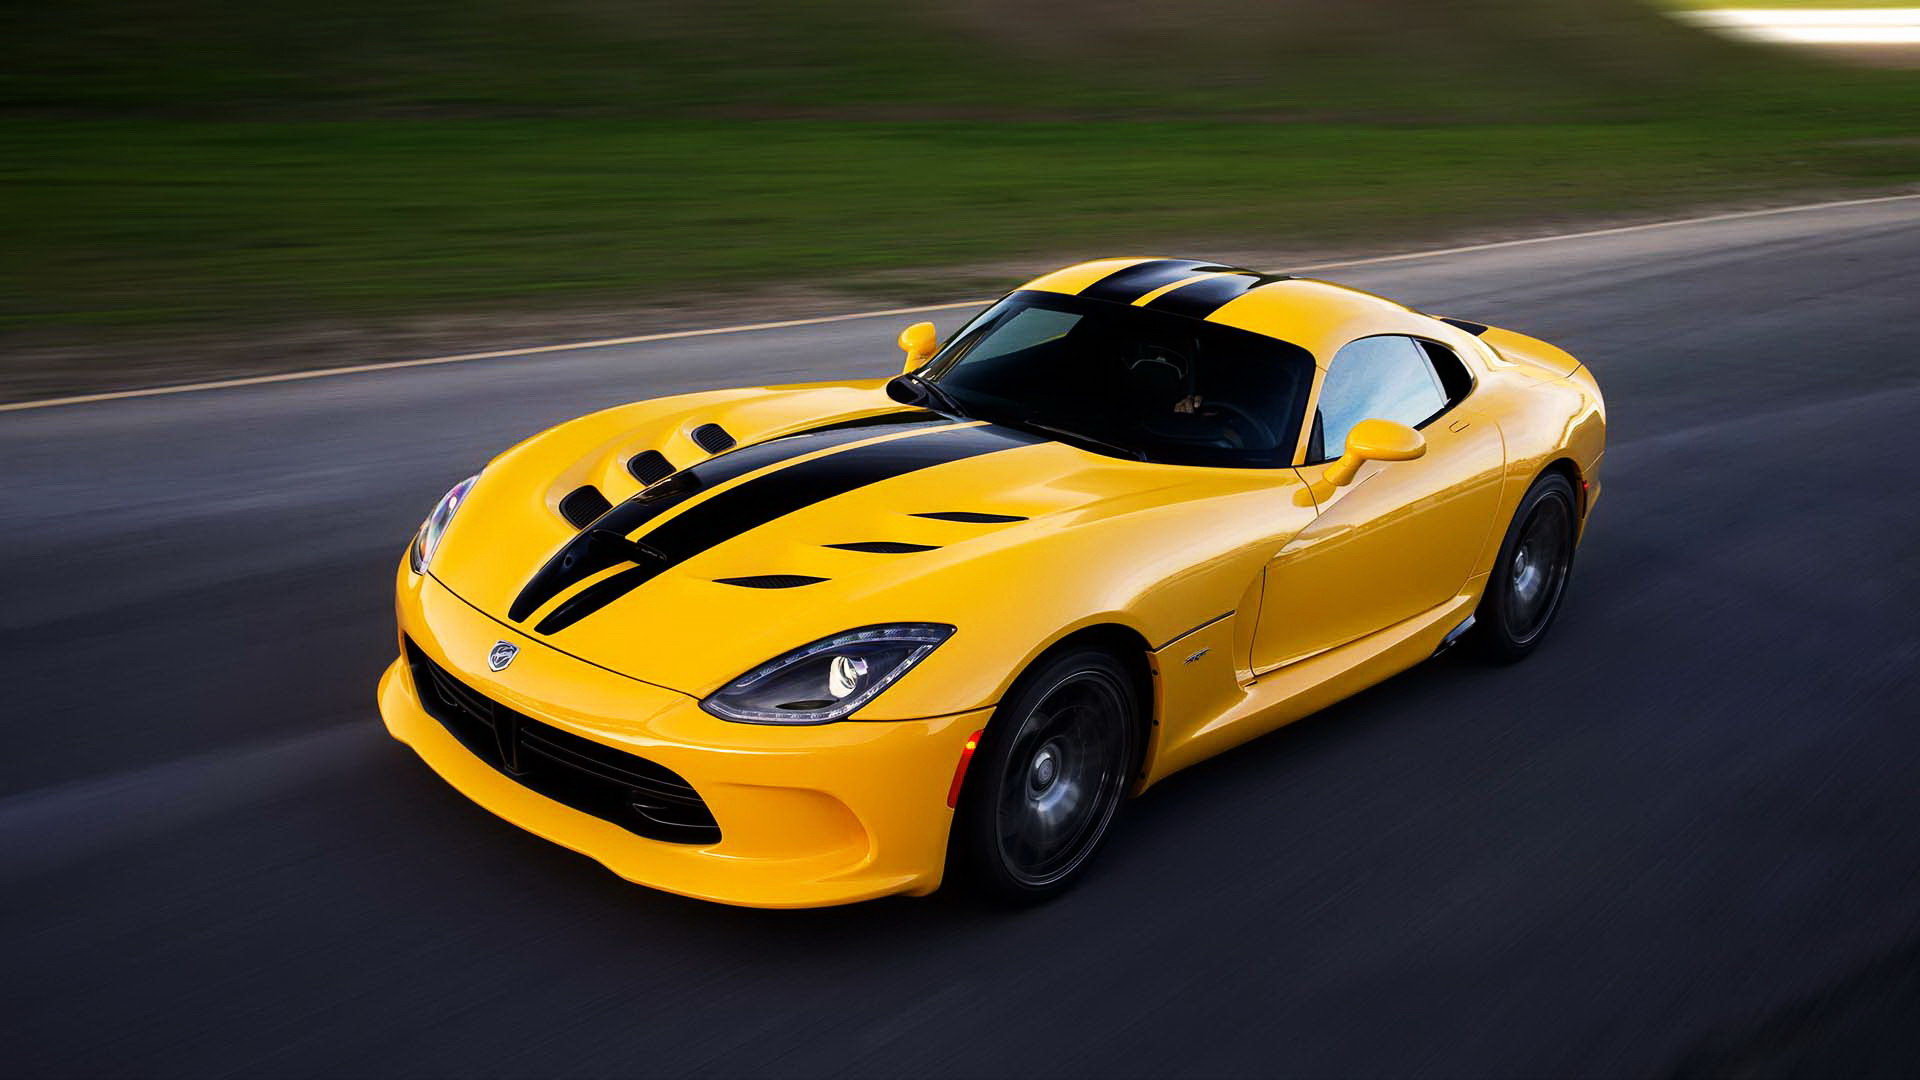 1920x1080 Dodge Viper HD Wallpapers | Backgrounds